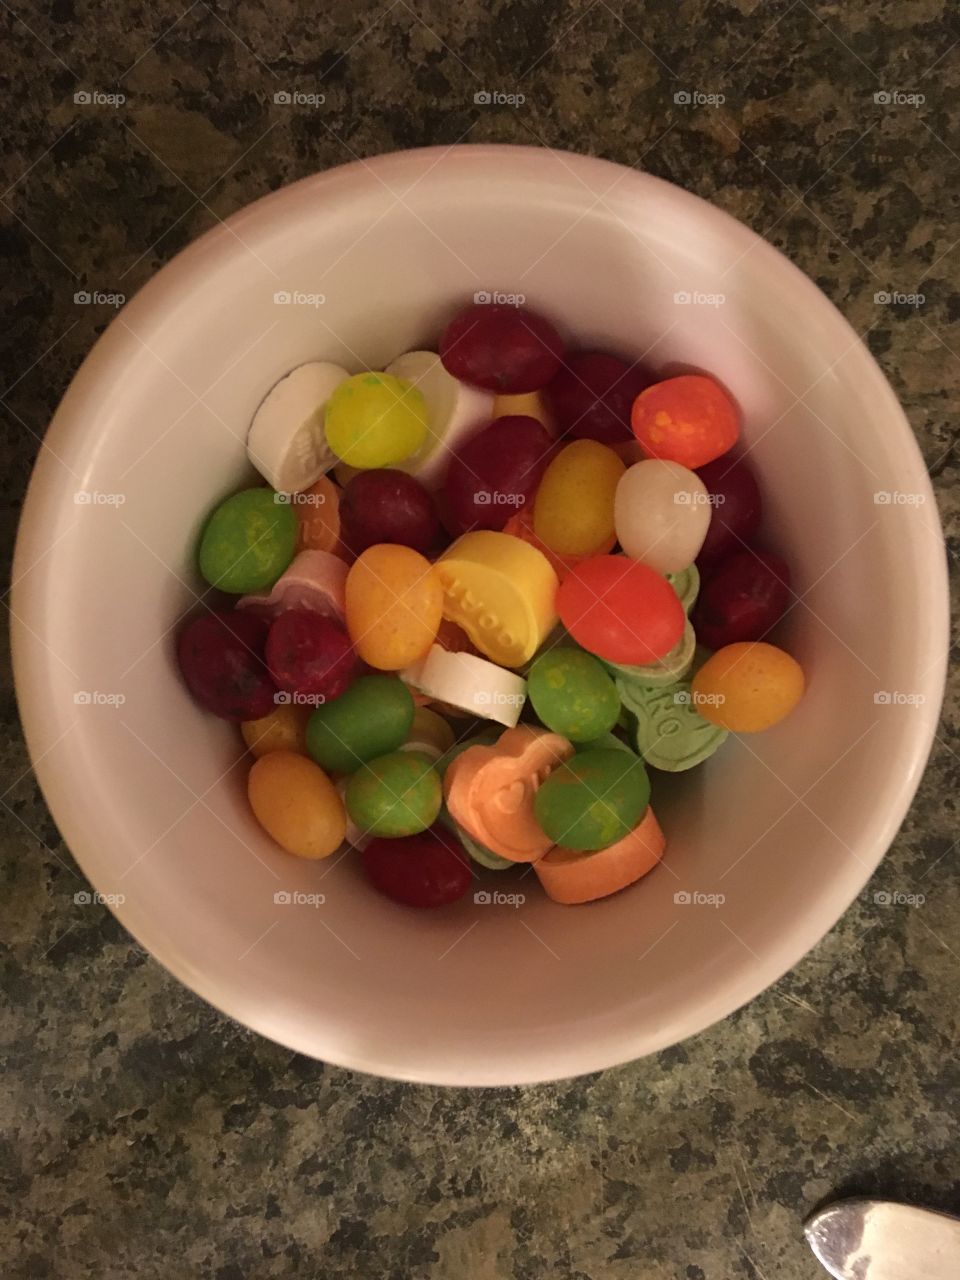 Gourmet jelly beans and hard candy Easter hearts for an evening snack. Colorful 